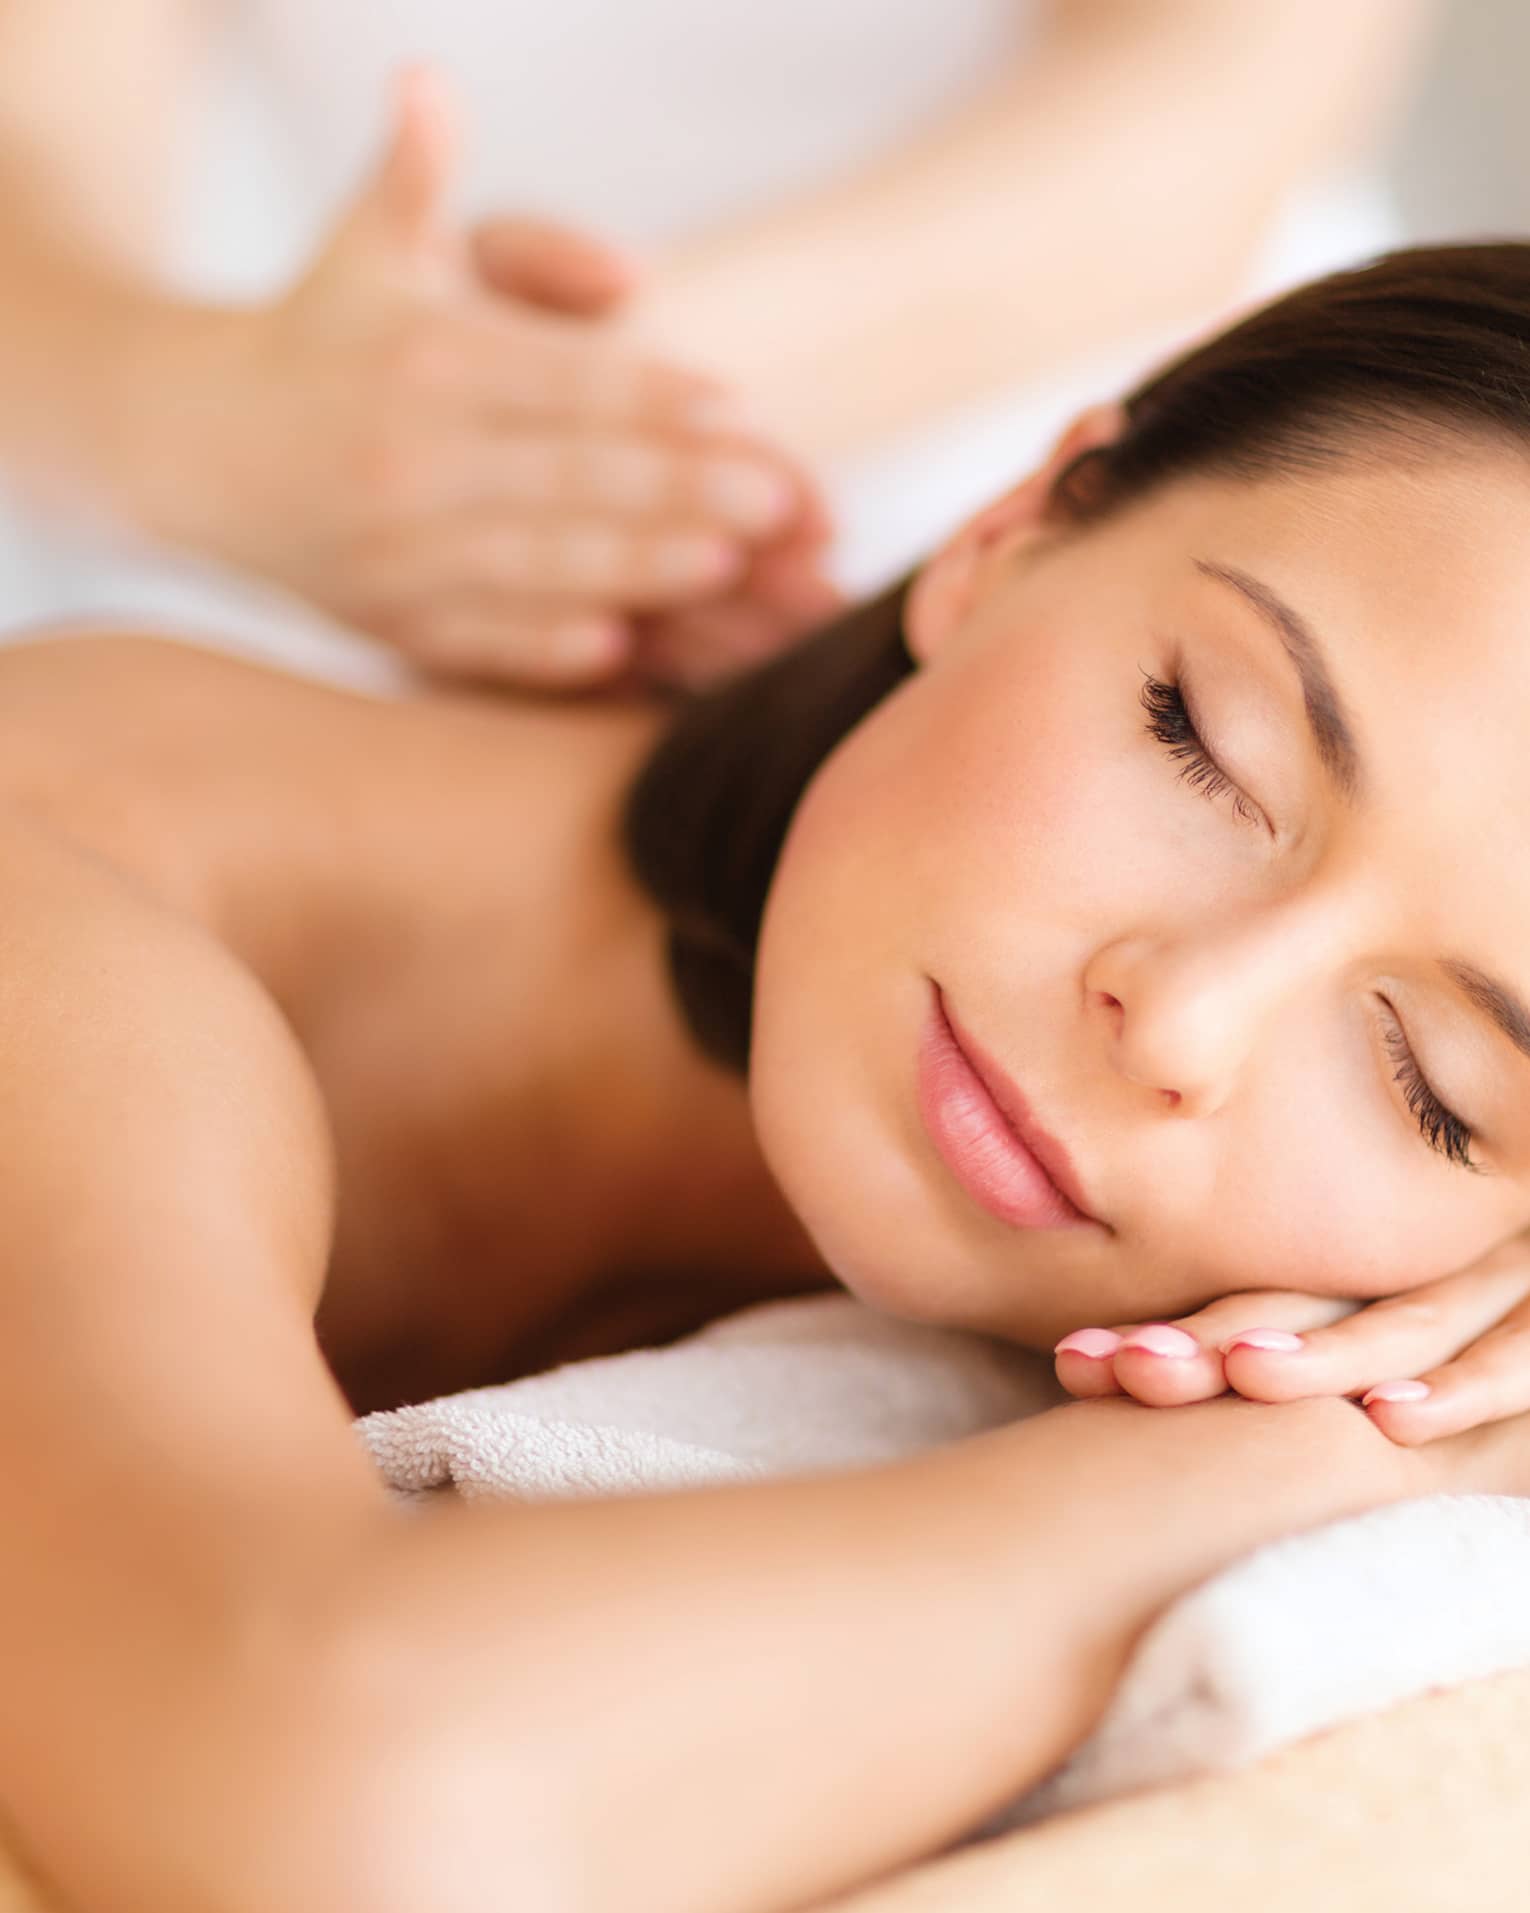 Woman lies on massage table, closes eyes. rests head on arms as spa staff massages back